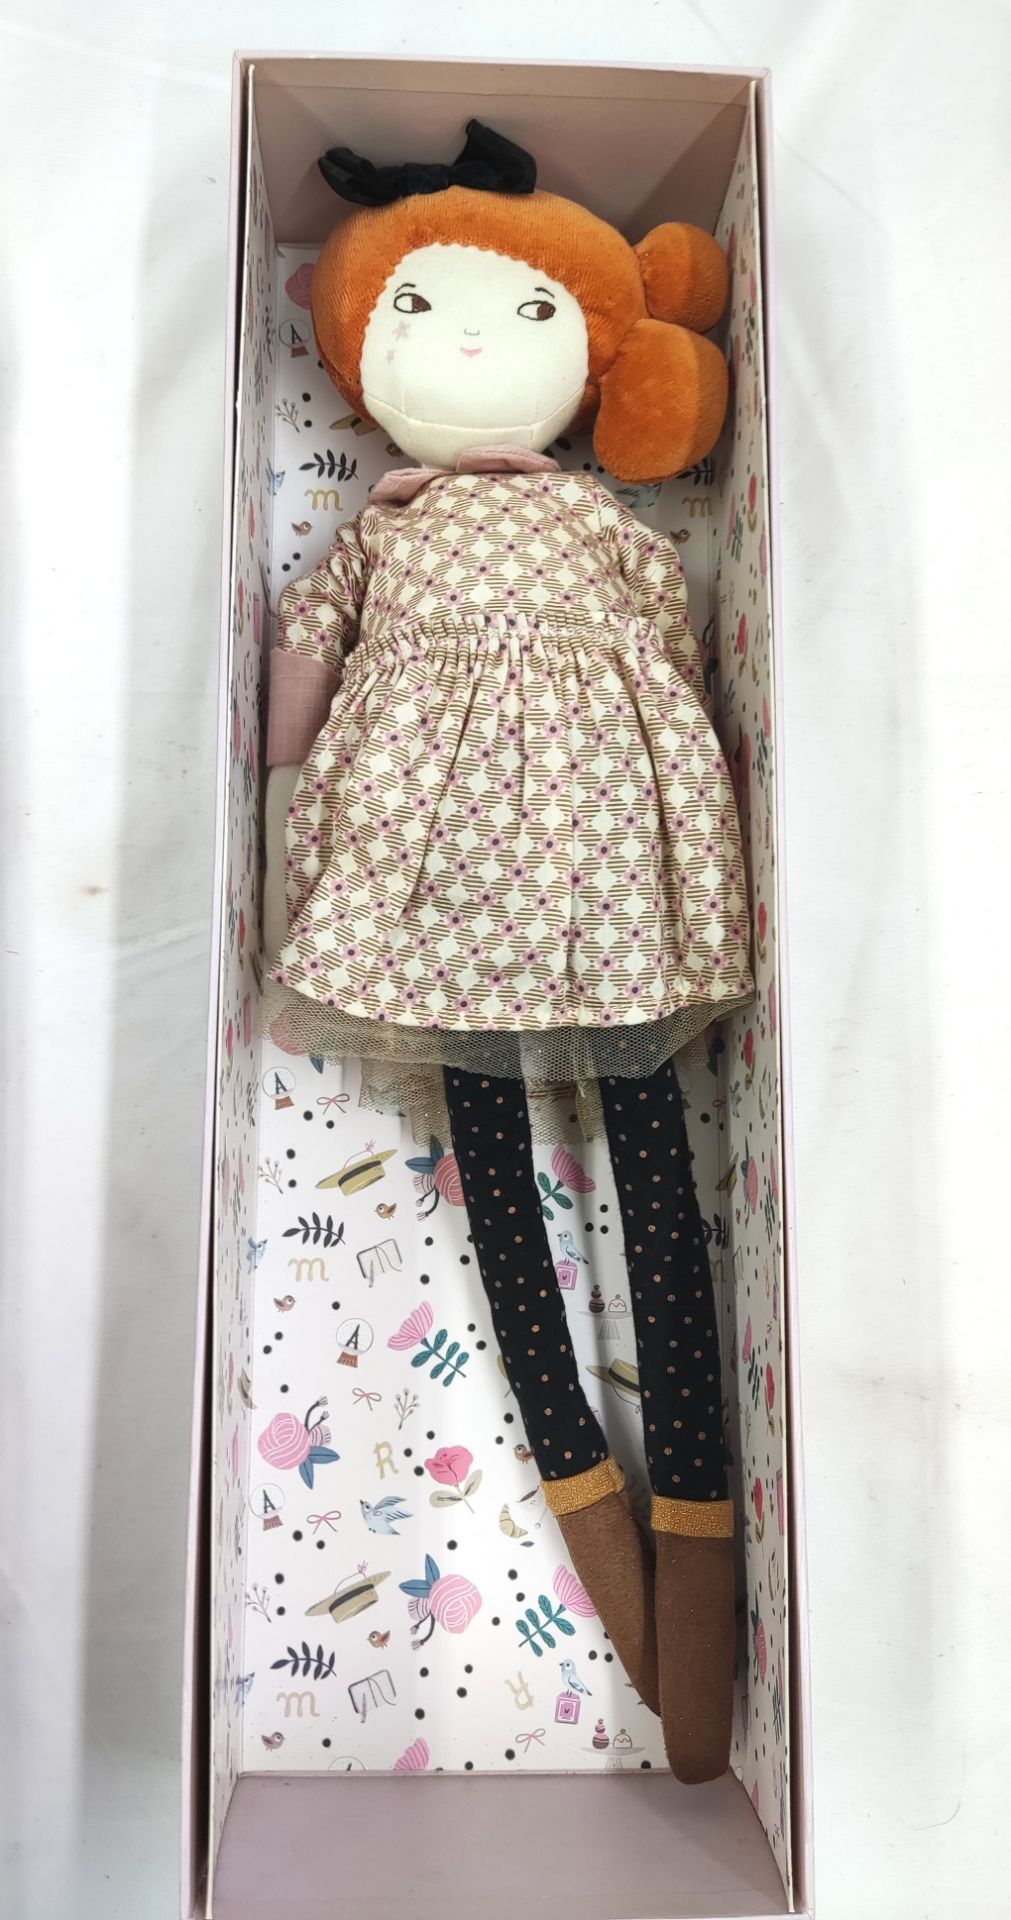 1 x MOULIN ROTY Madame Constance 47cm Les Parisiennes Doll - New/Boxed - Original RRP £60.00 - Image 6 of 10